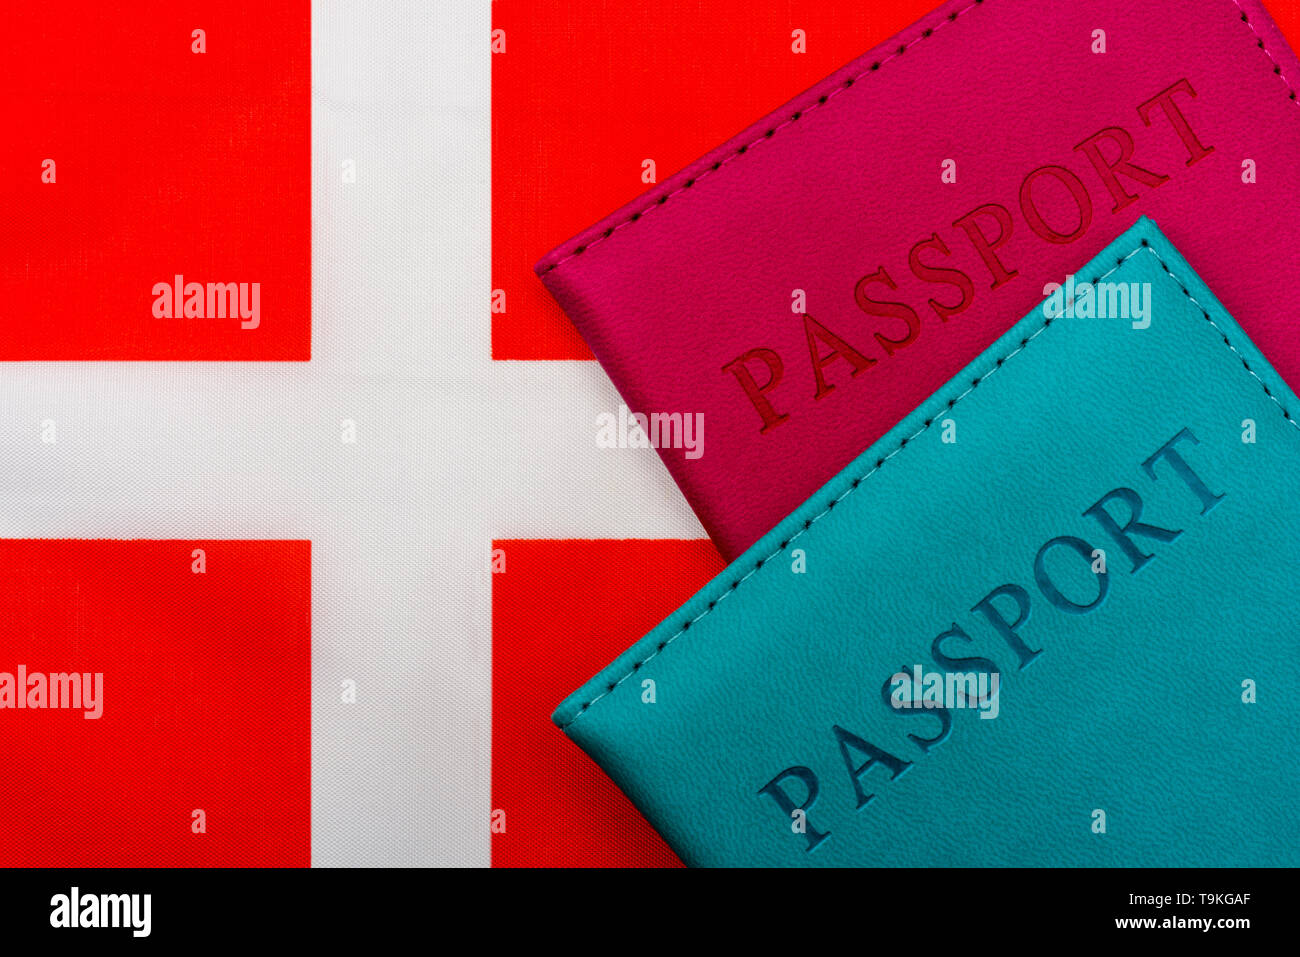 On the flag of Denmark is a passport. The concept of travel and tourism to foreign countries. Stock Photo